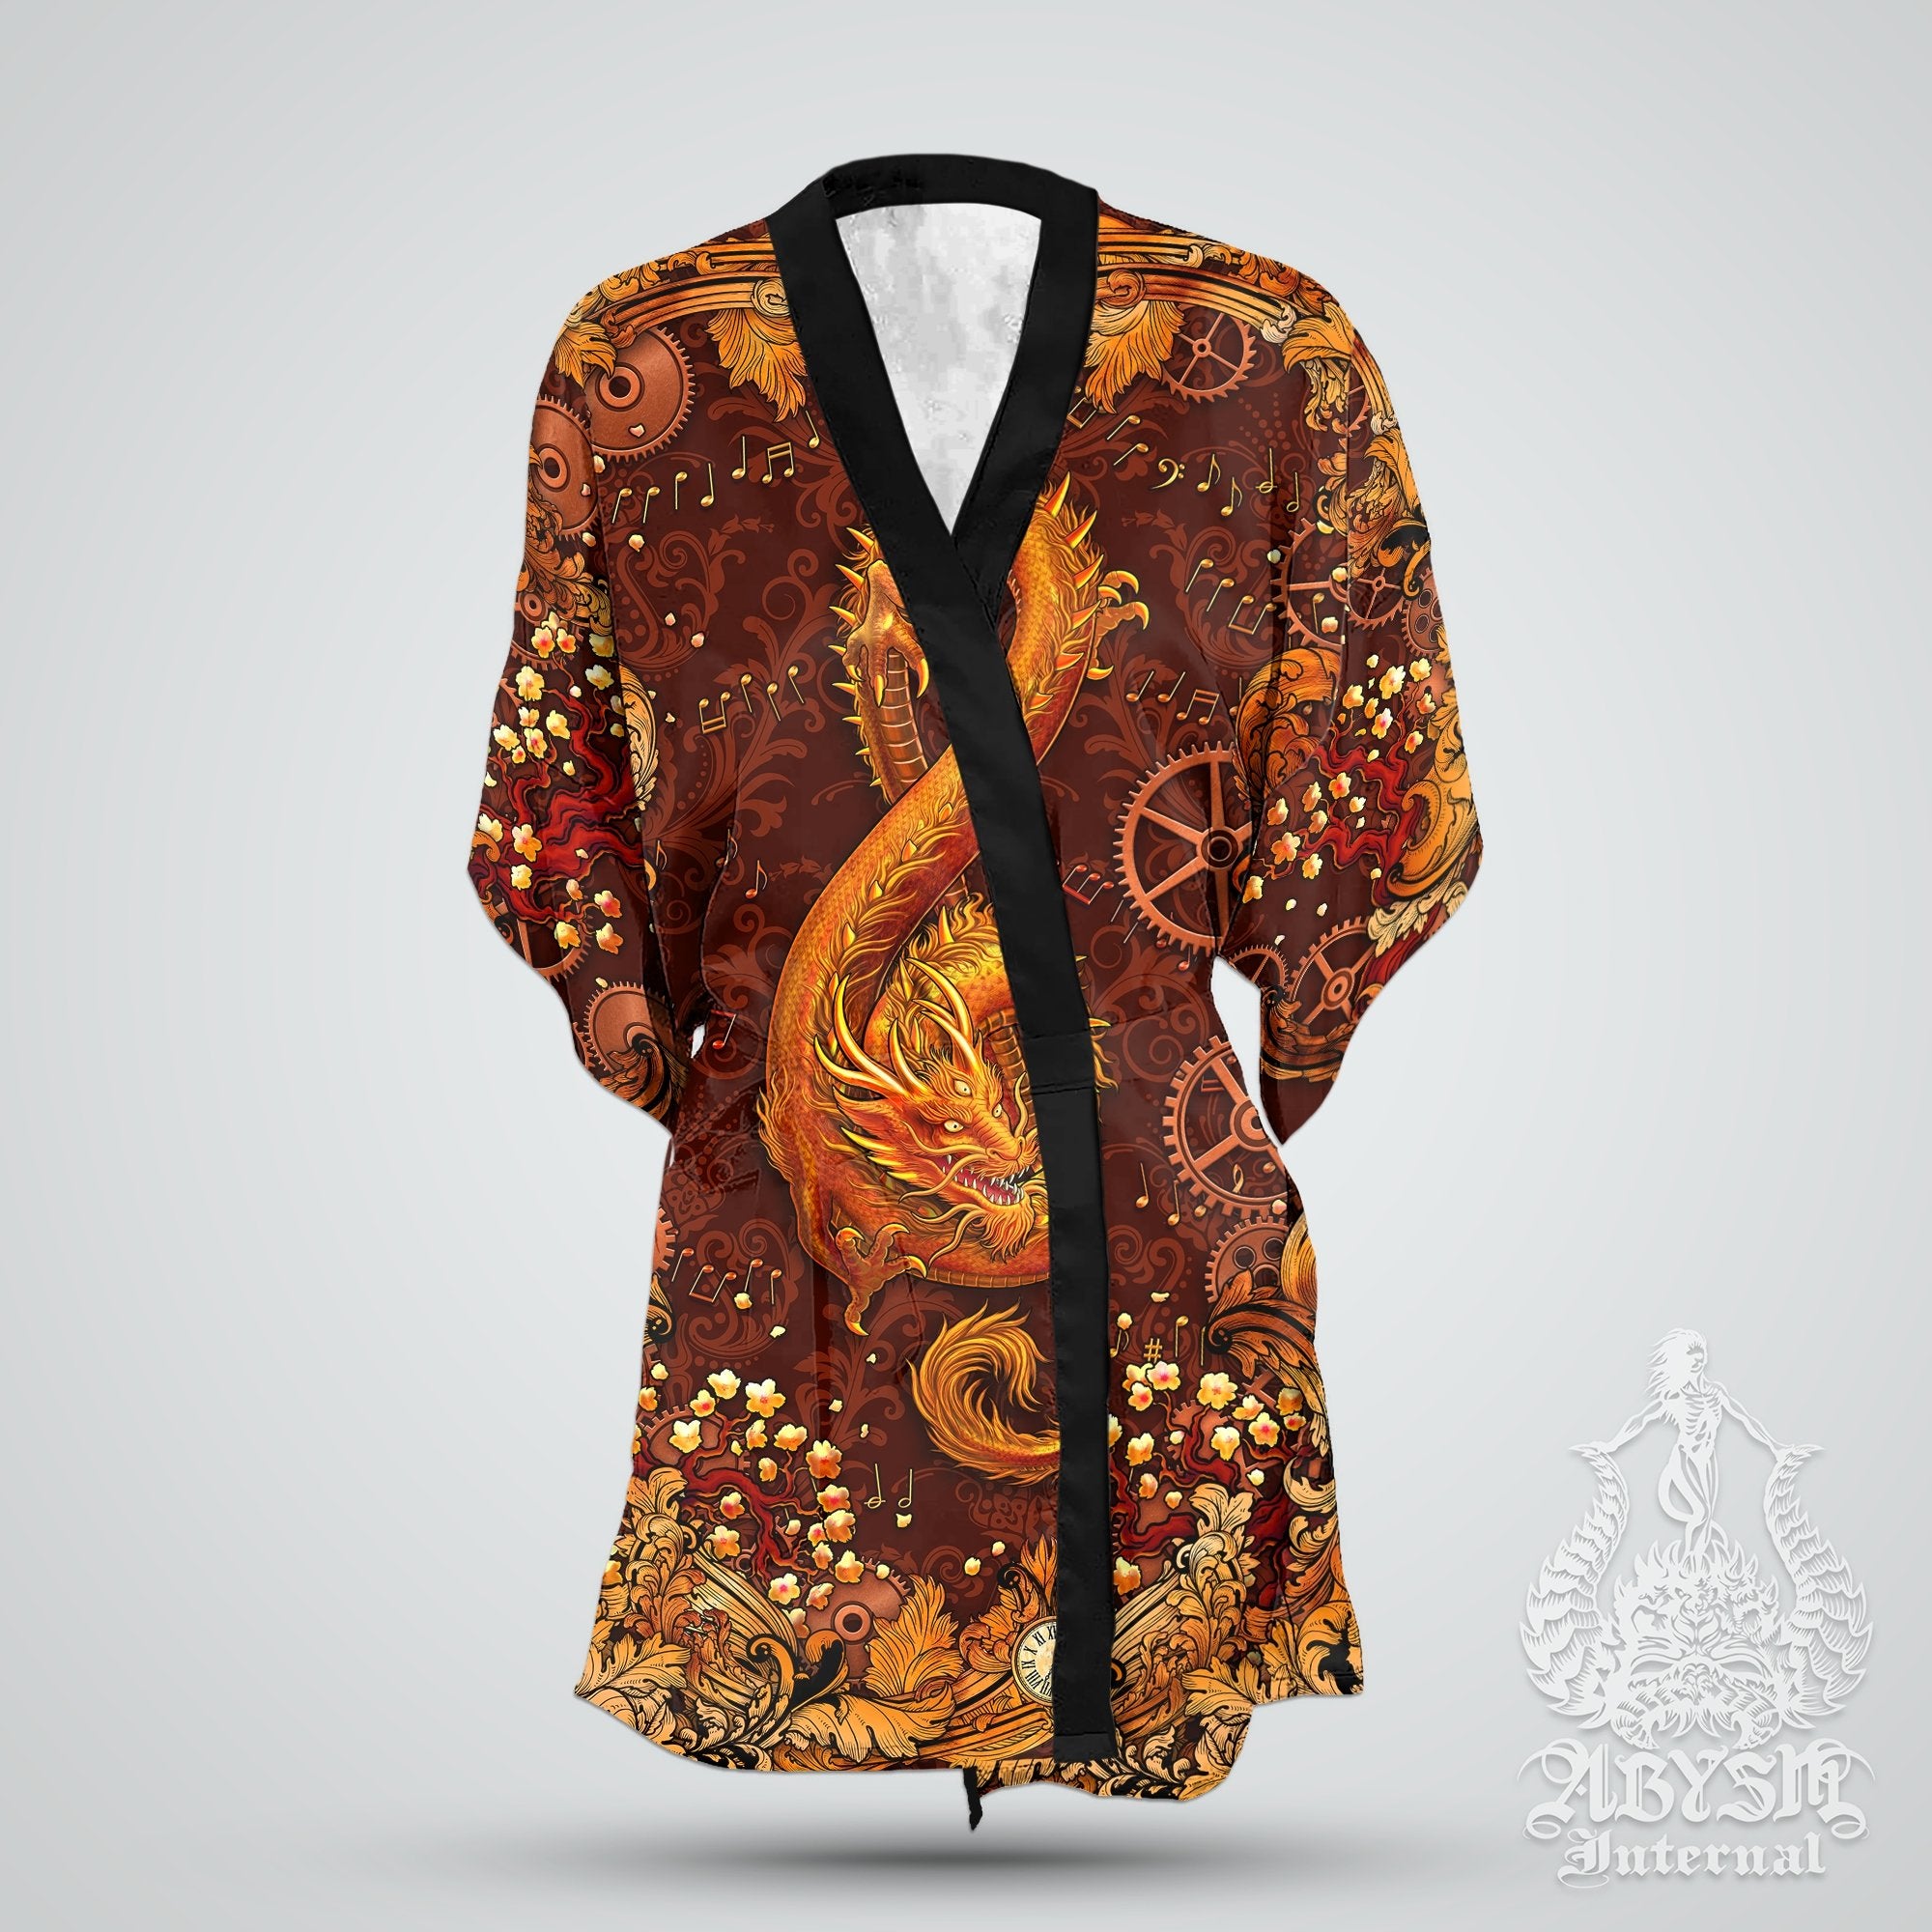 Music Cover Up, Beach Outfit, Party Kimono, Summer Festival Robe, Boho Indie and Alternative Clothing, Unisex - Dragon, Steampunk - Abysm Internal